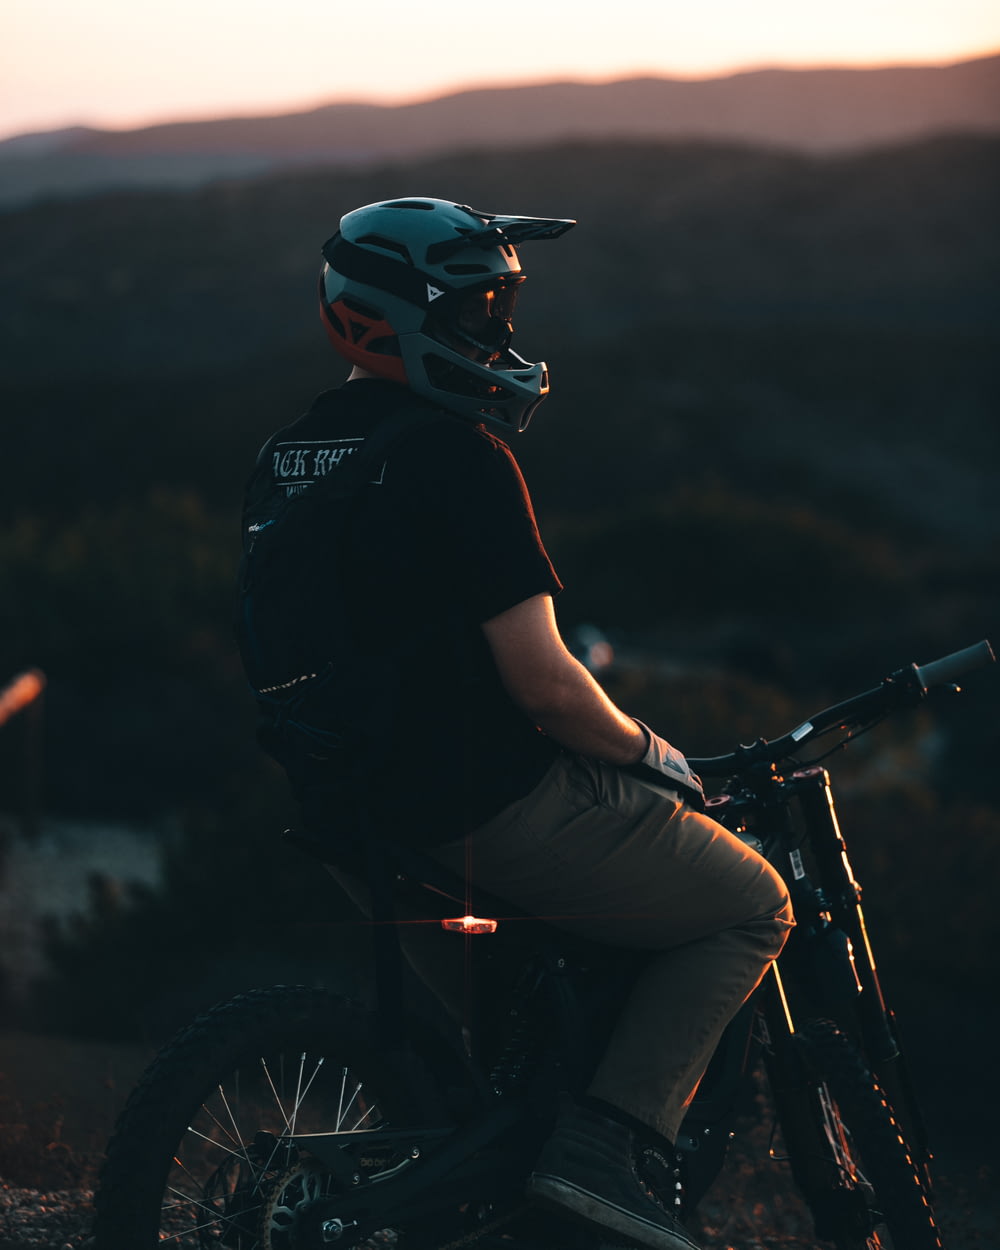 a man wearing a helmet and riding a motorcycle